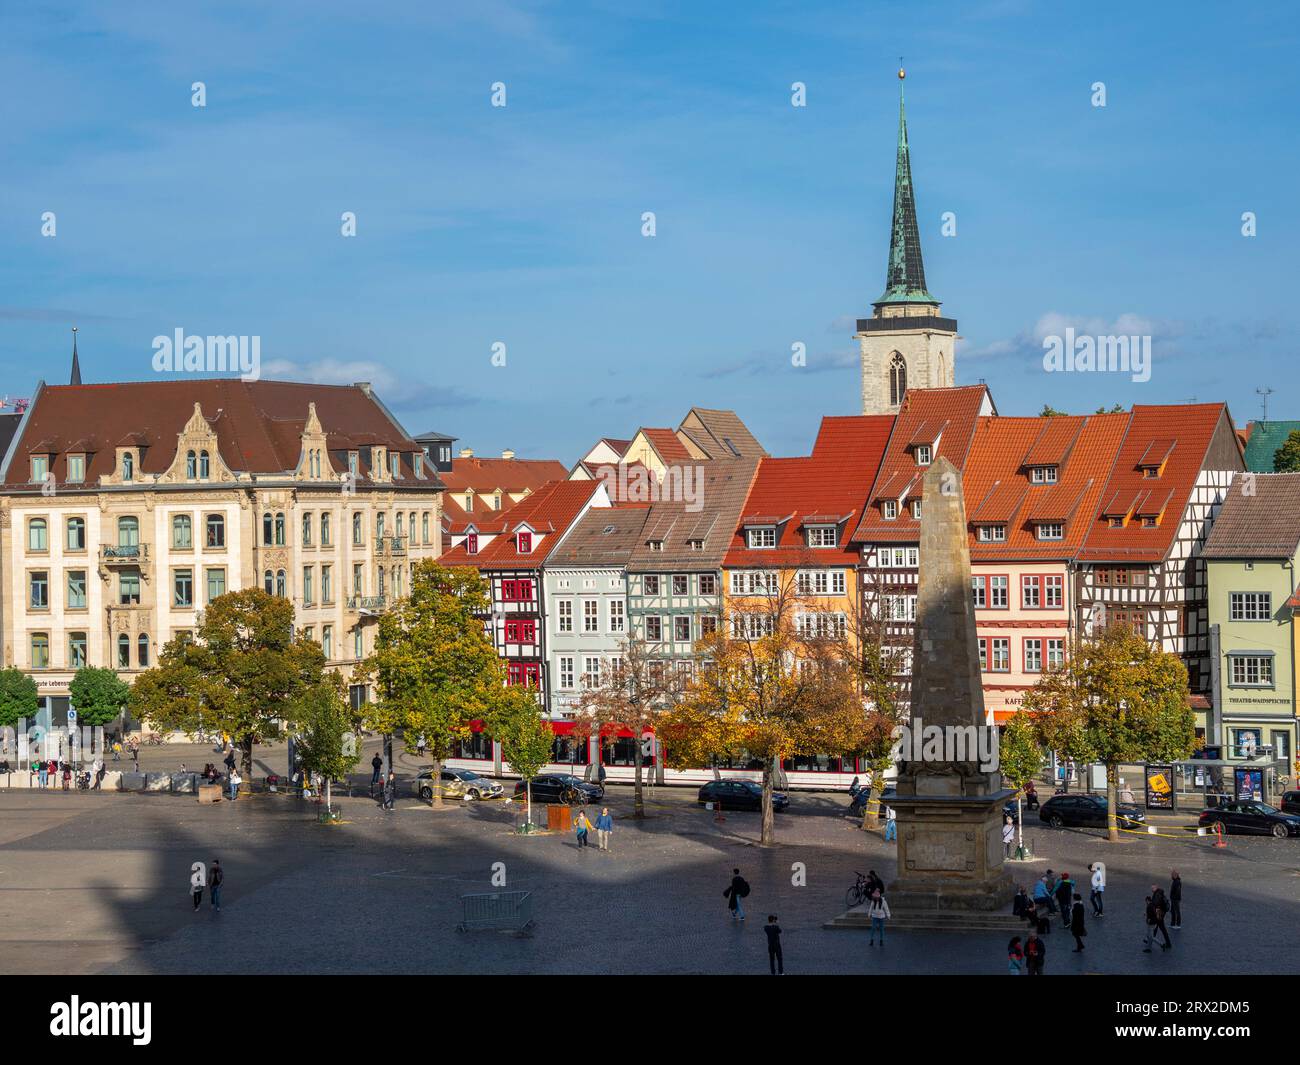 View of the city of Erfurt, the capital and largest city of the Central German state of Thuringia, Germany, Europe Stock Photo